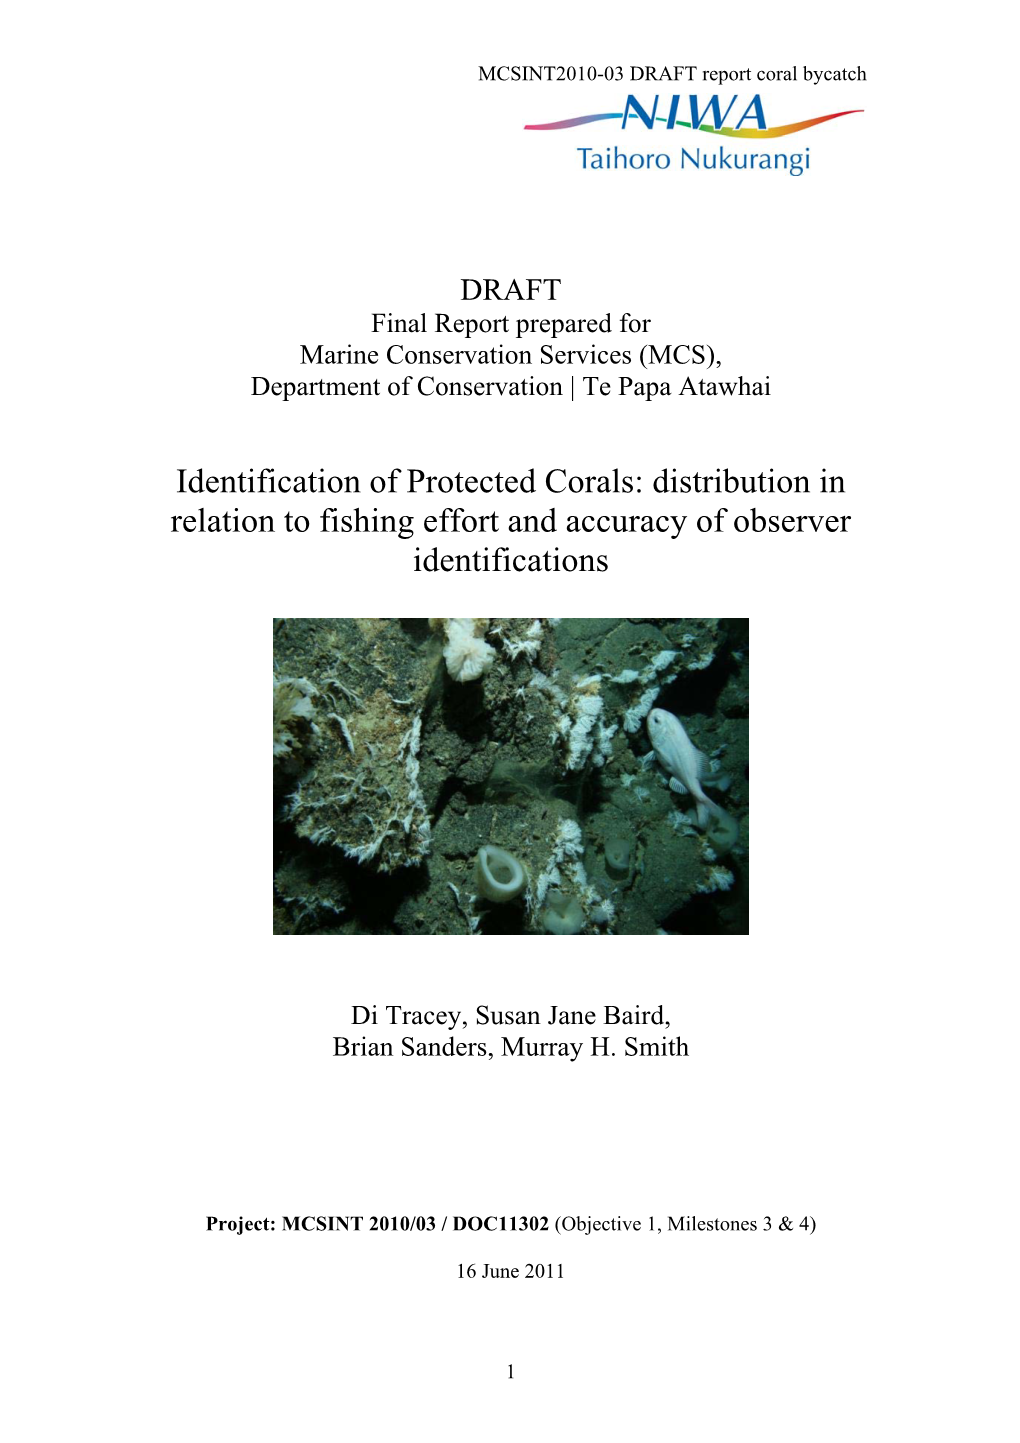 Identification of Protected Corals: Distribution in Relation to Fishing Effort and Accuracy of Observer Identifications